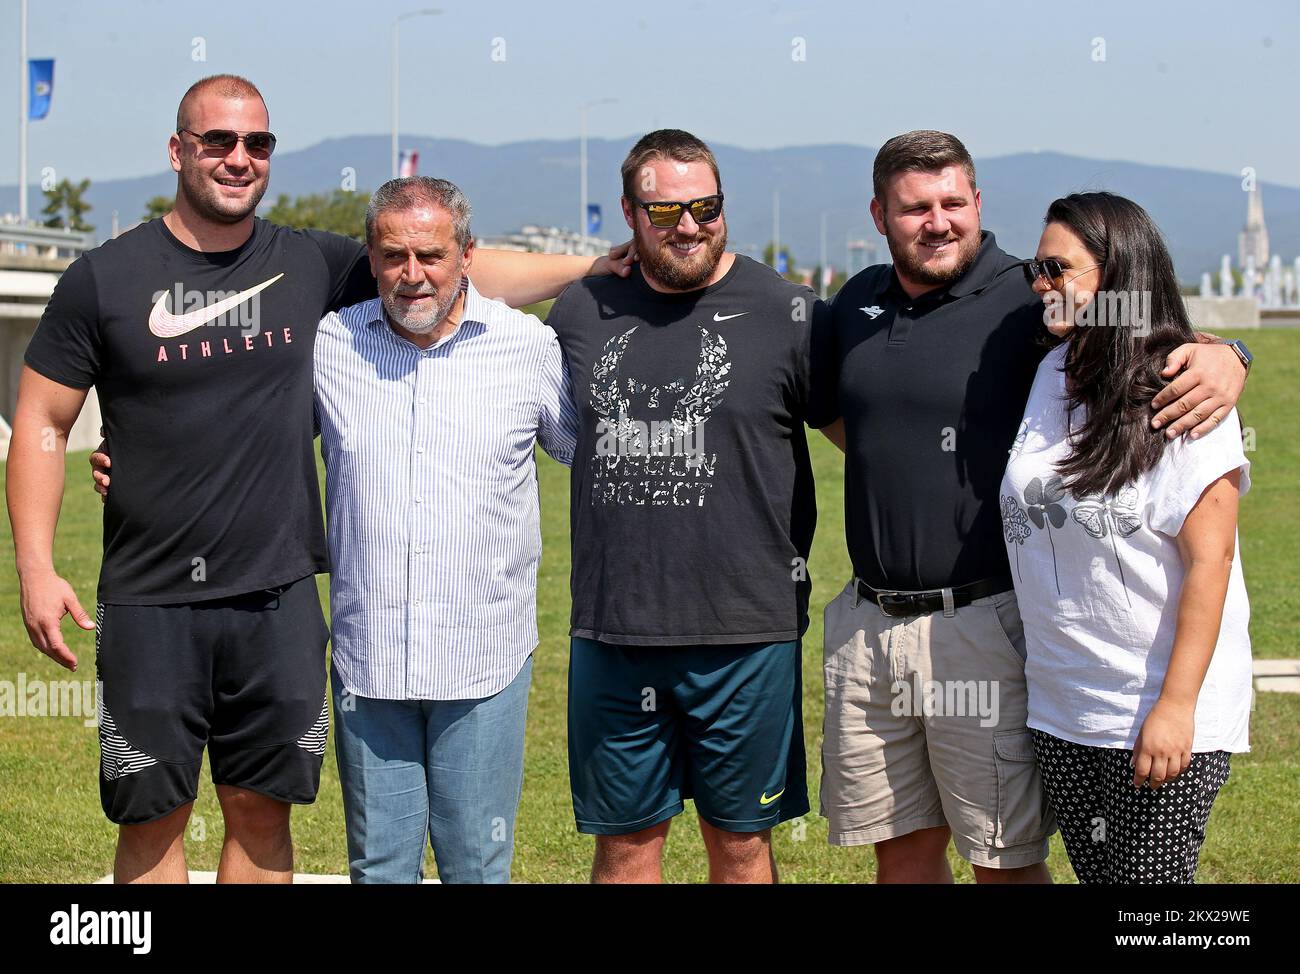 27.08.2017, Zagreb, Croatia - A press conference one day before The IAAF World Challenge Zagreb 2017. Shot put will take place at the City Fountains Park in Zagreb, on 28th Aug. 2017. Stipe Zunic, Milan Bandic, Tomas Walsh, Joe Kovacs, Ivana Brkljacic. Photo: Igor Kralj/PIXSELL Stock Photo